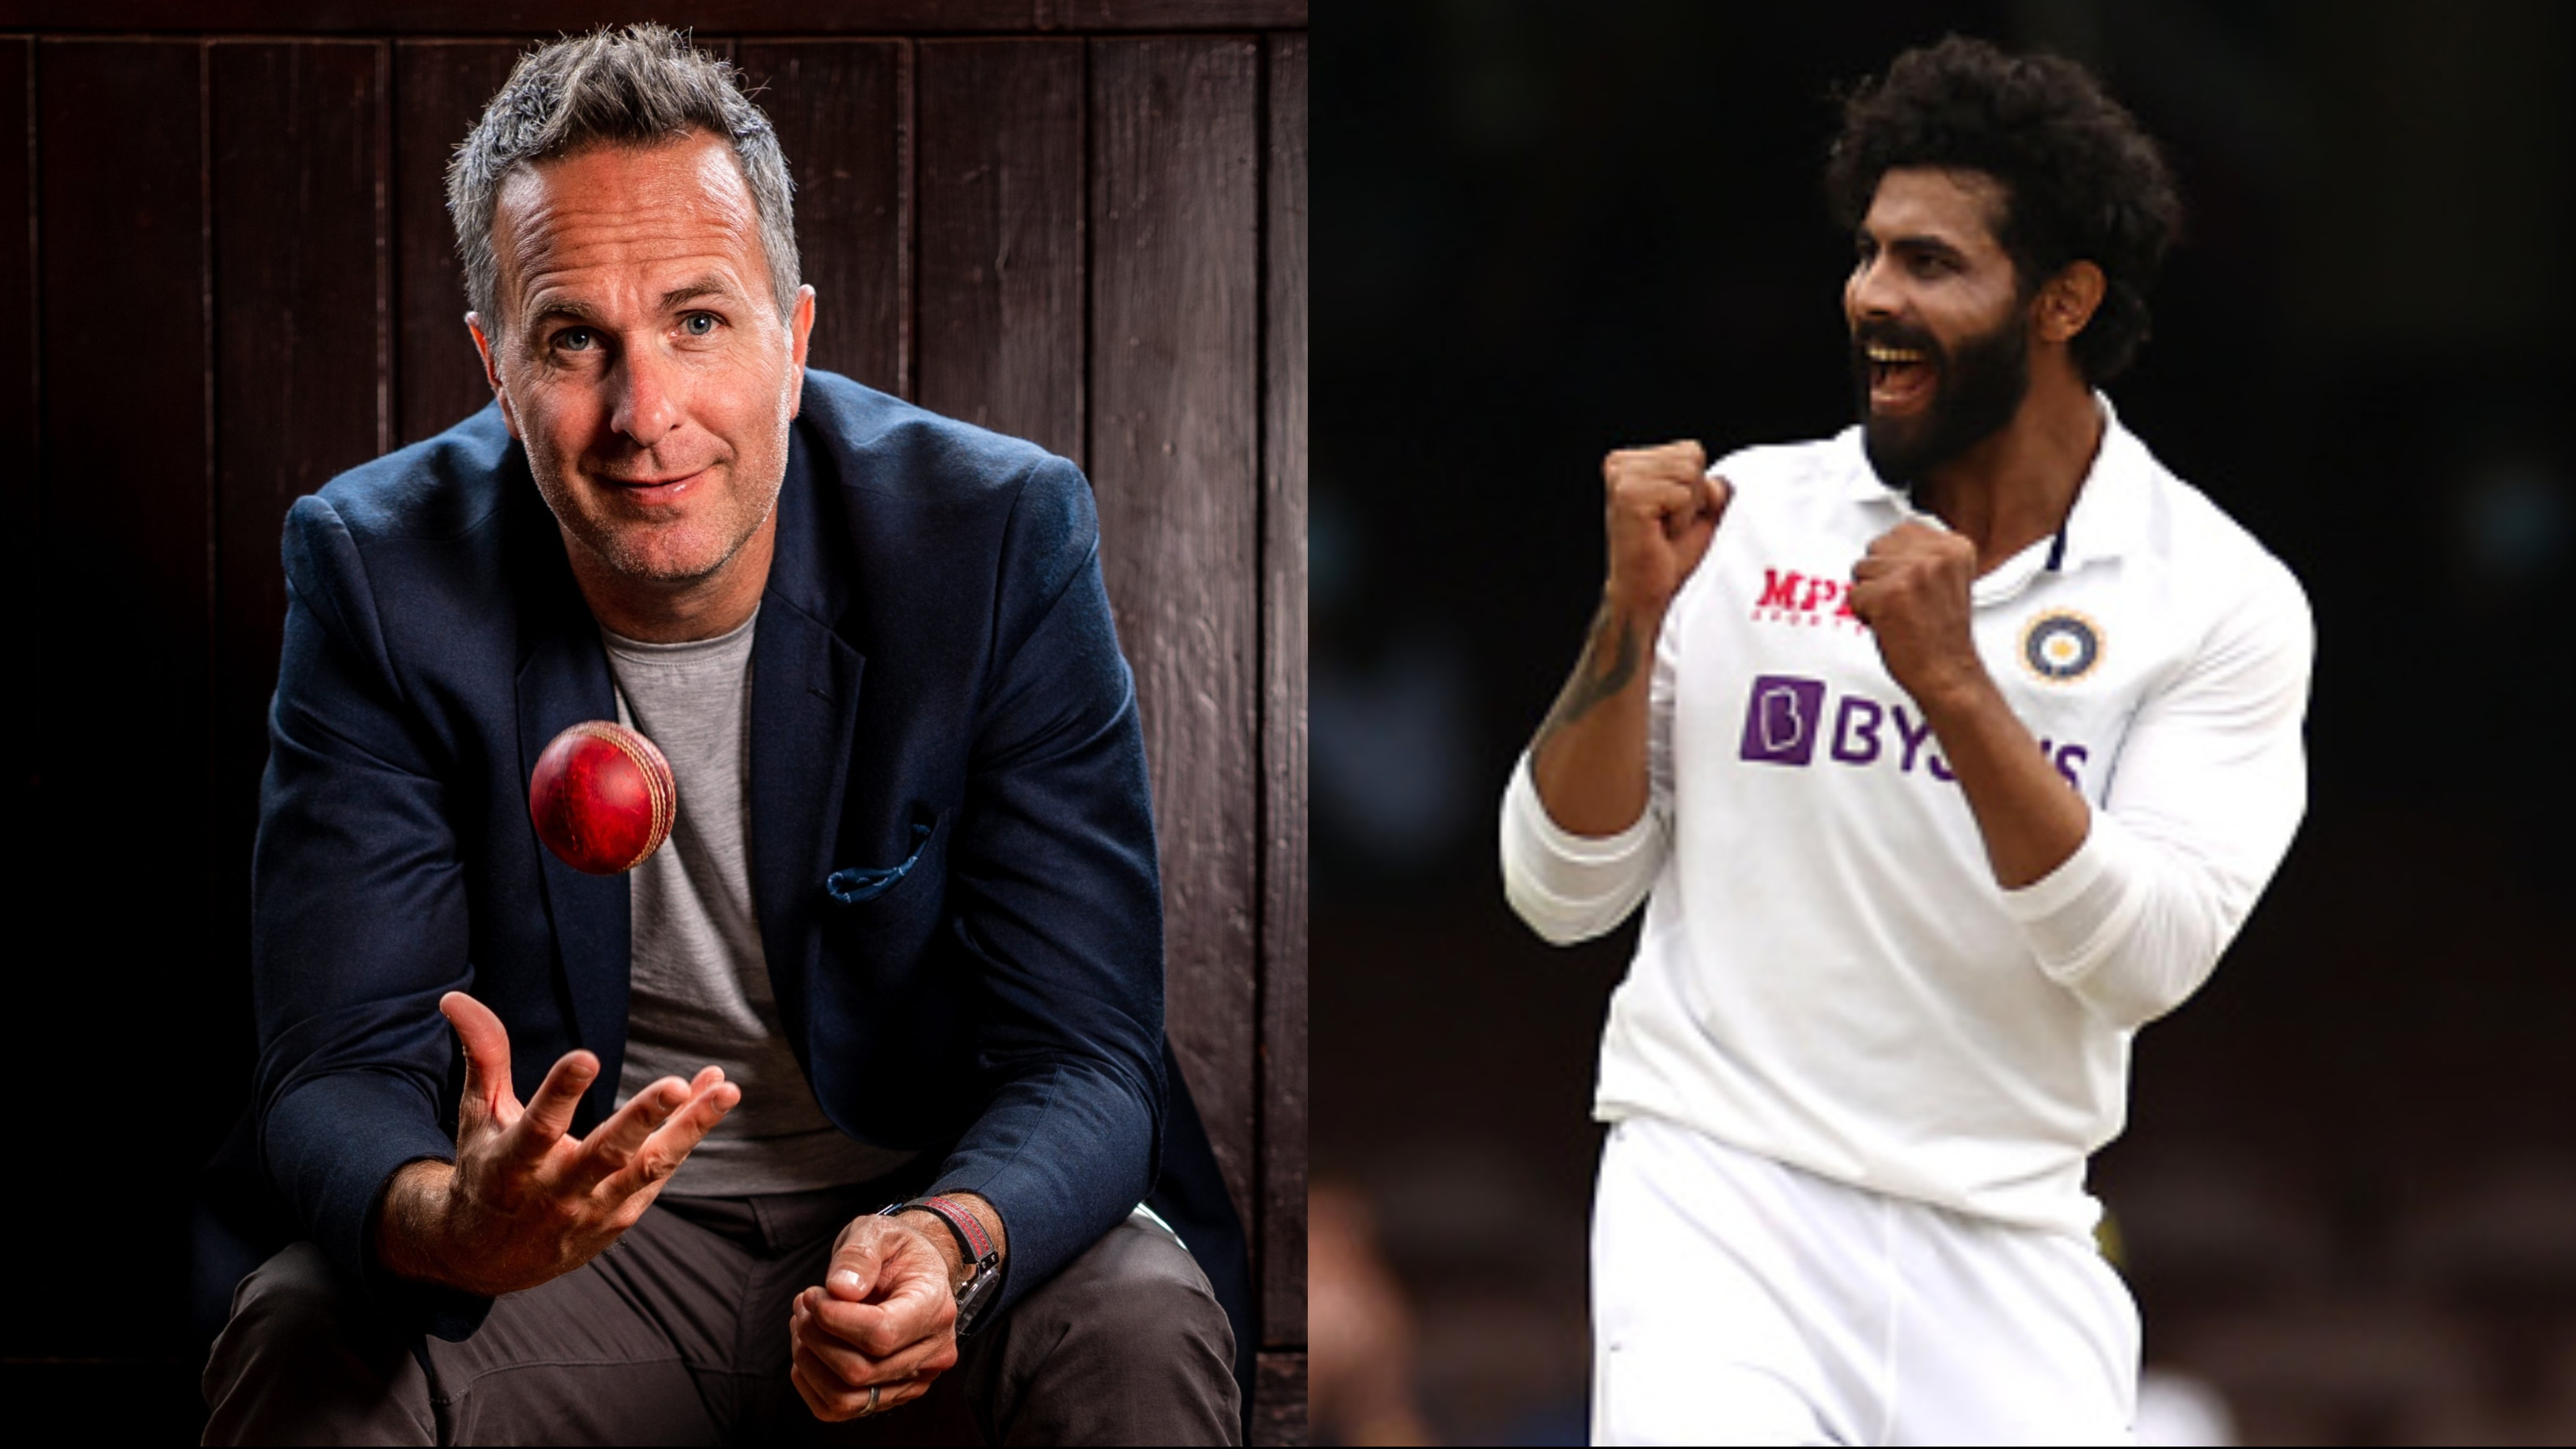 IND v ENG 2021: India without Ravindra Jadeja gives England a sniff, says Michael Vaughan